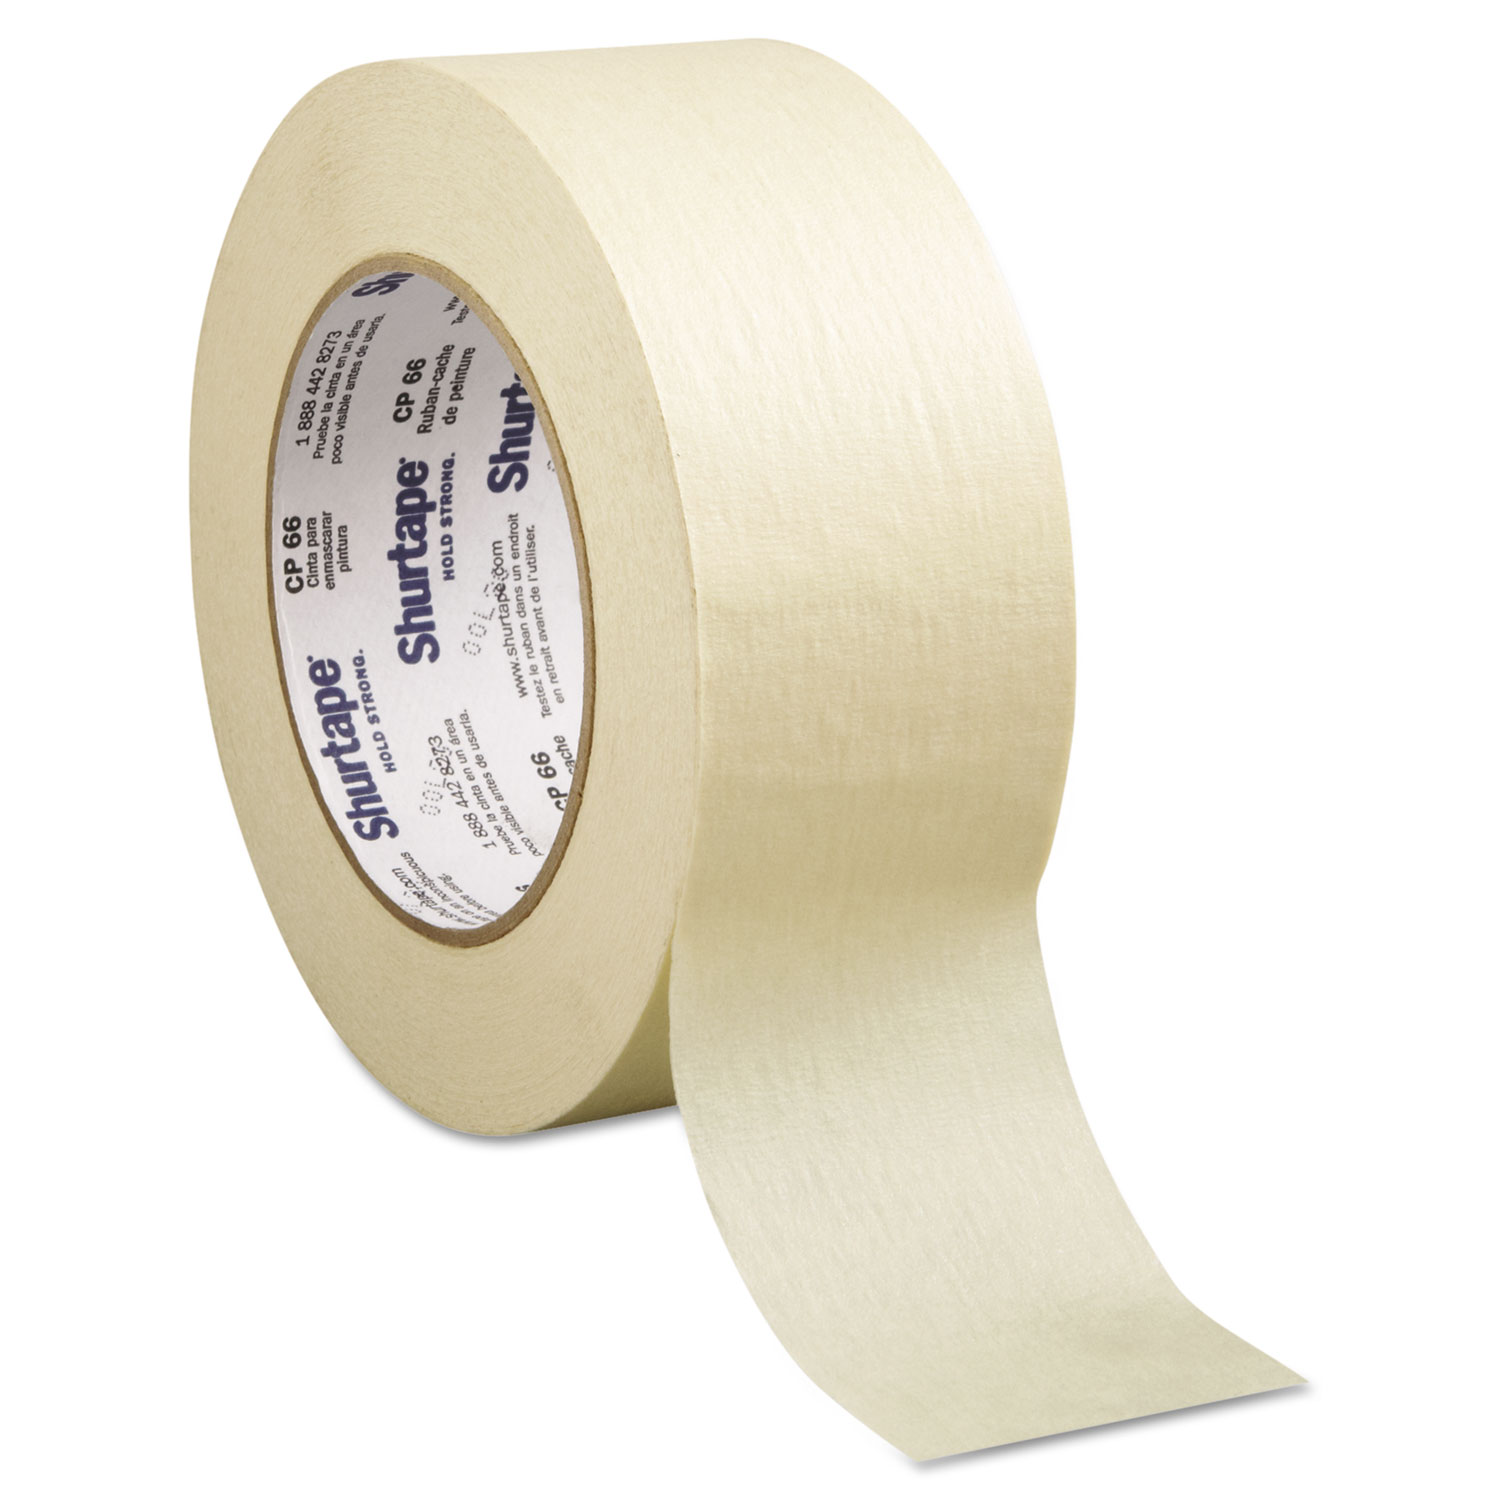 Contractor/Professional Grade Masking Tape, 2 x 60yd, Crepe